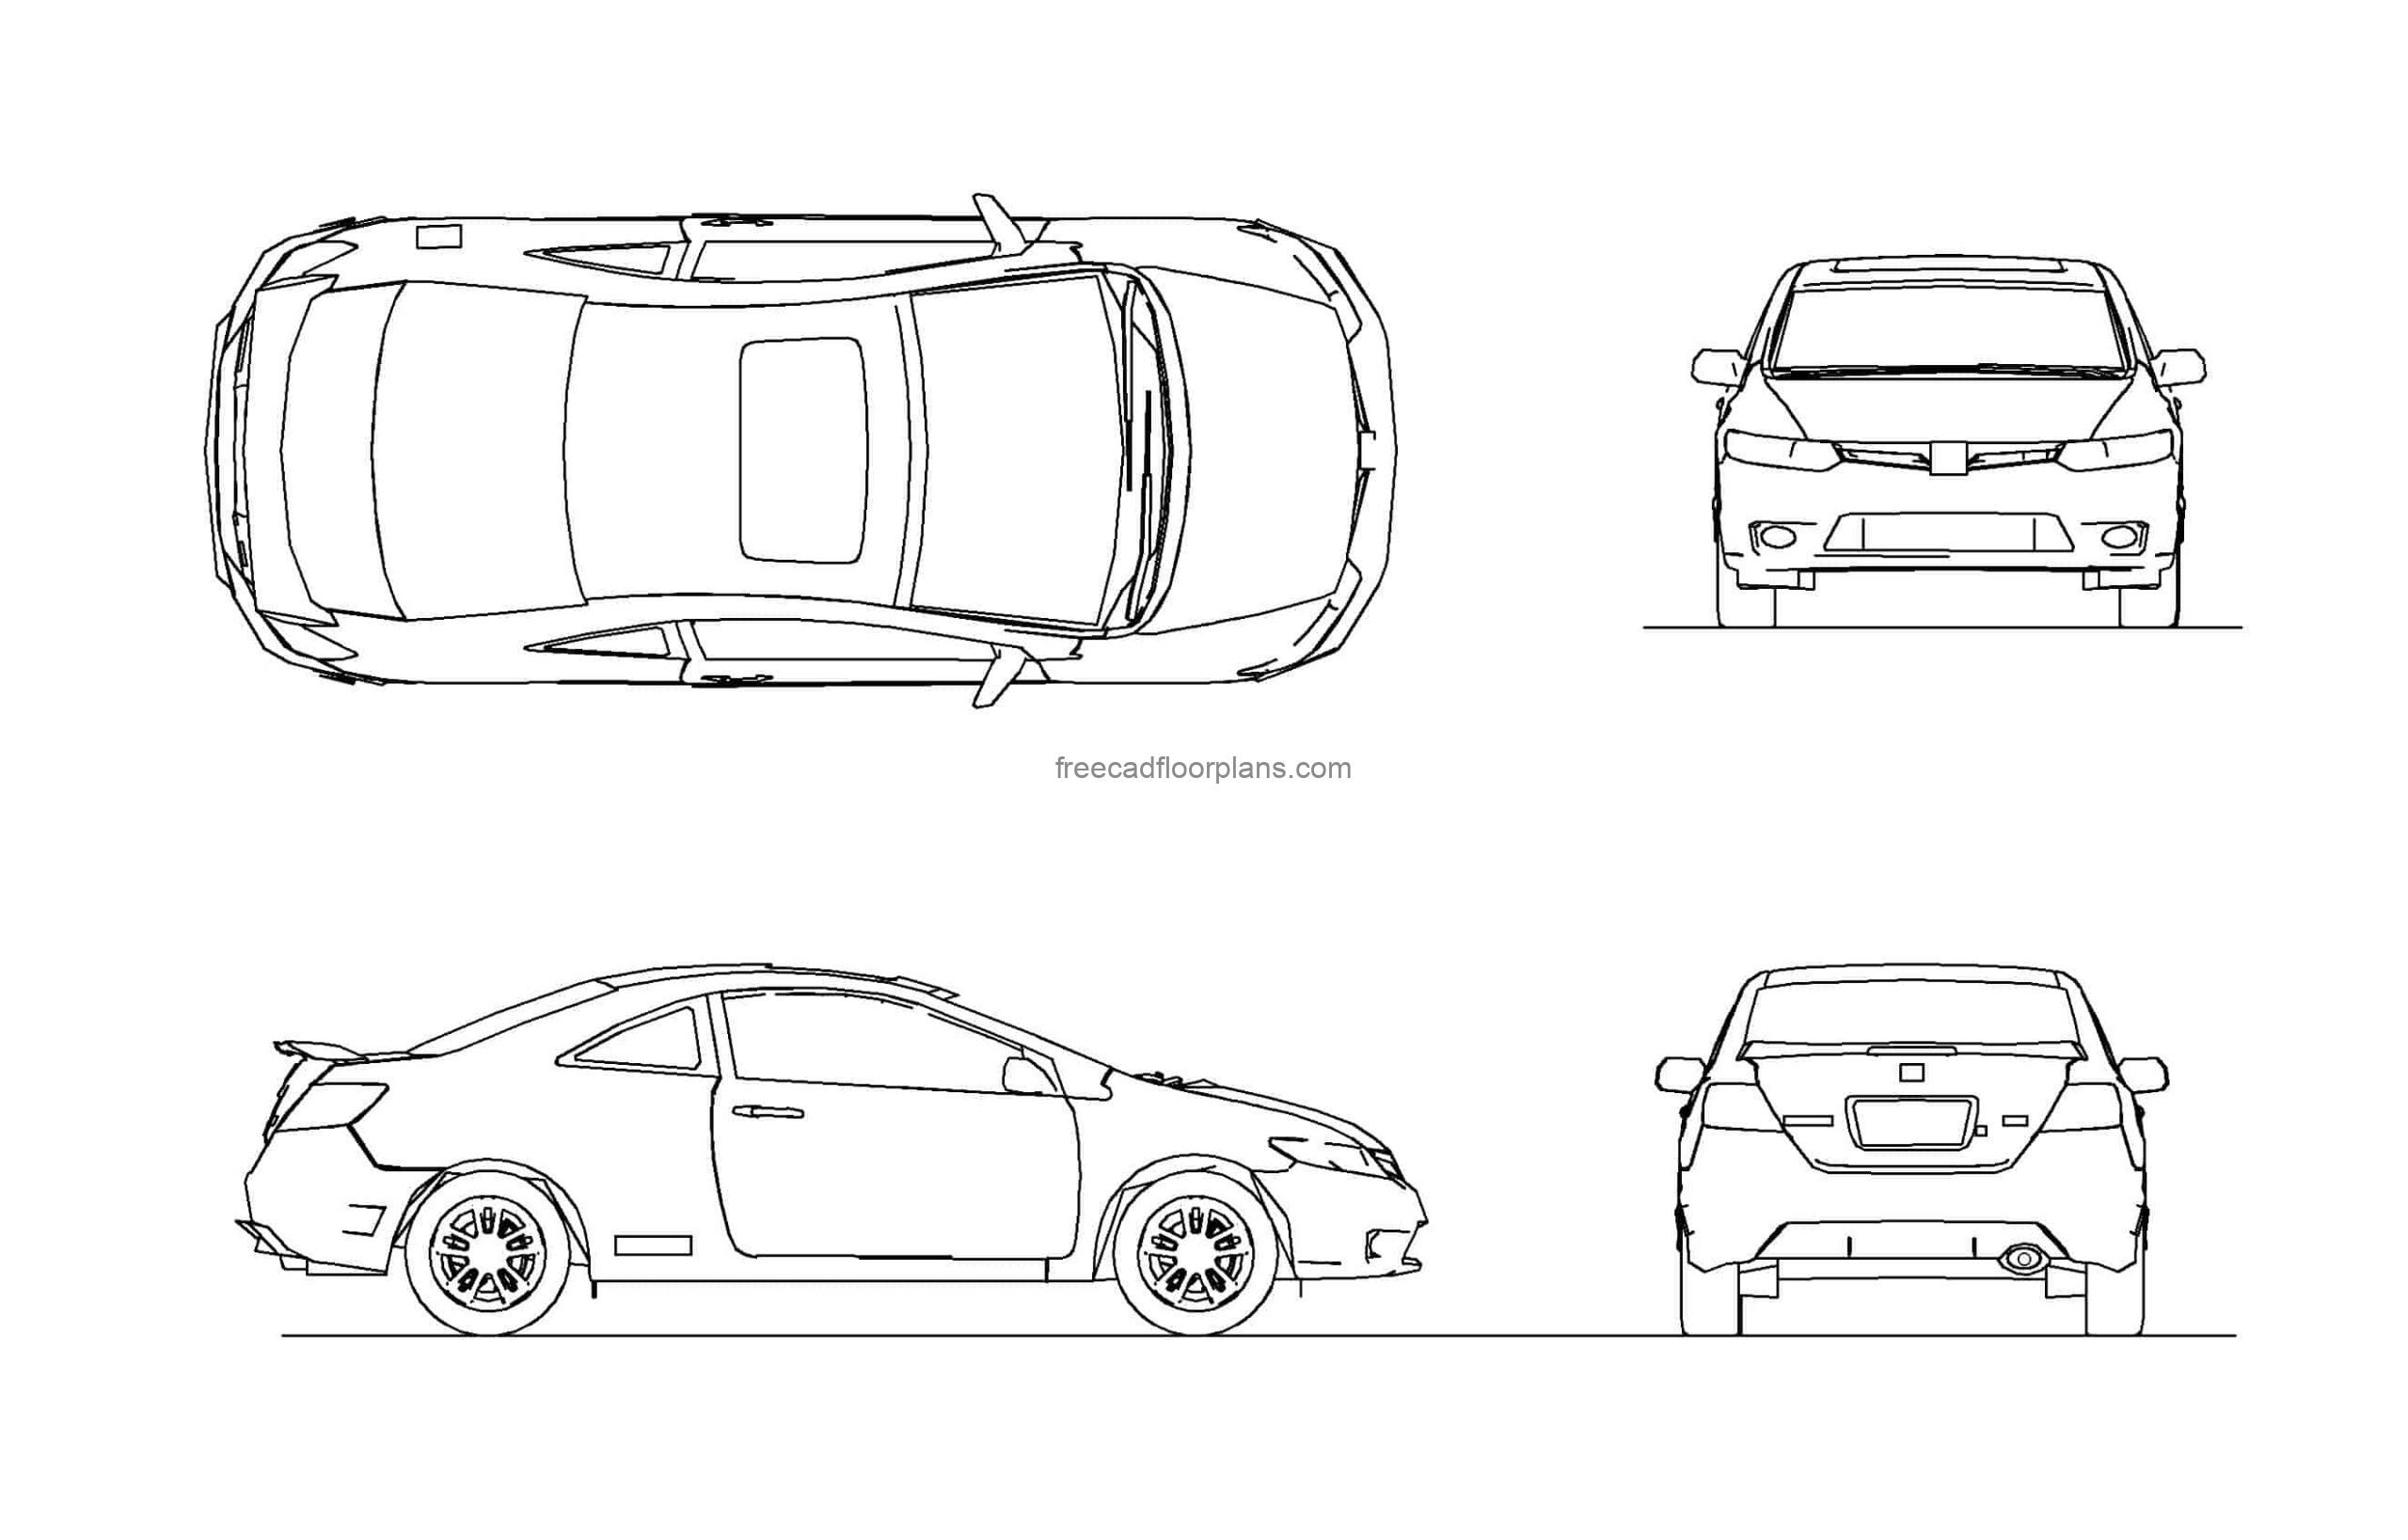 autocad draing of a honda civic car, 2d plan and elevations views, dwg file for free download